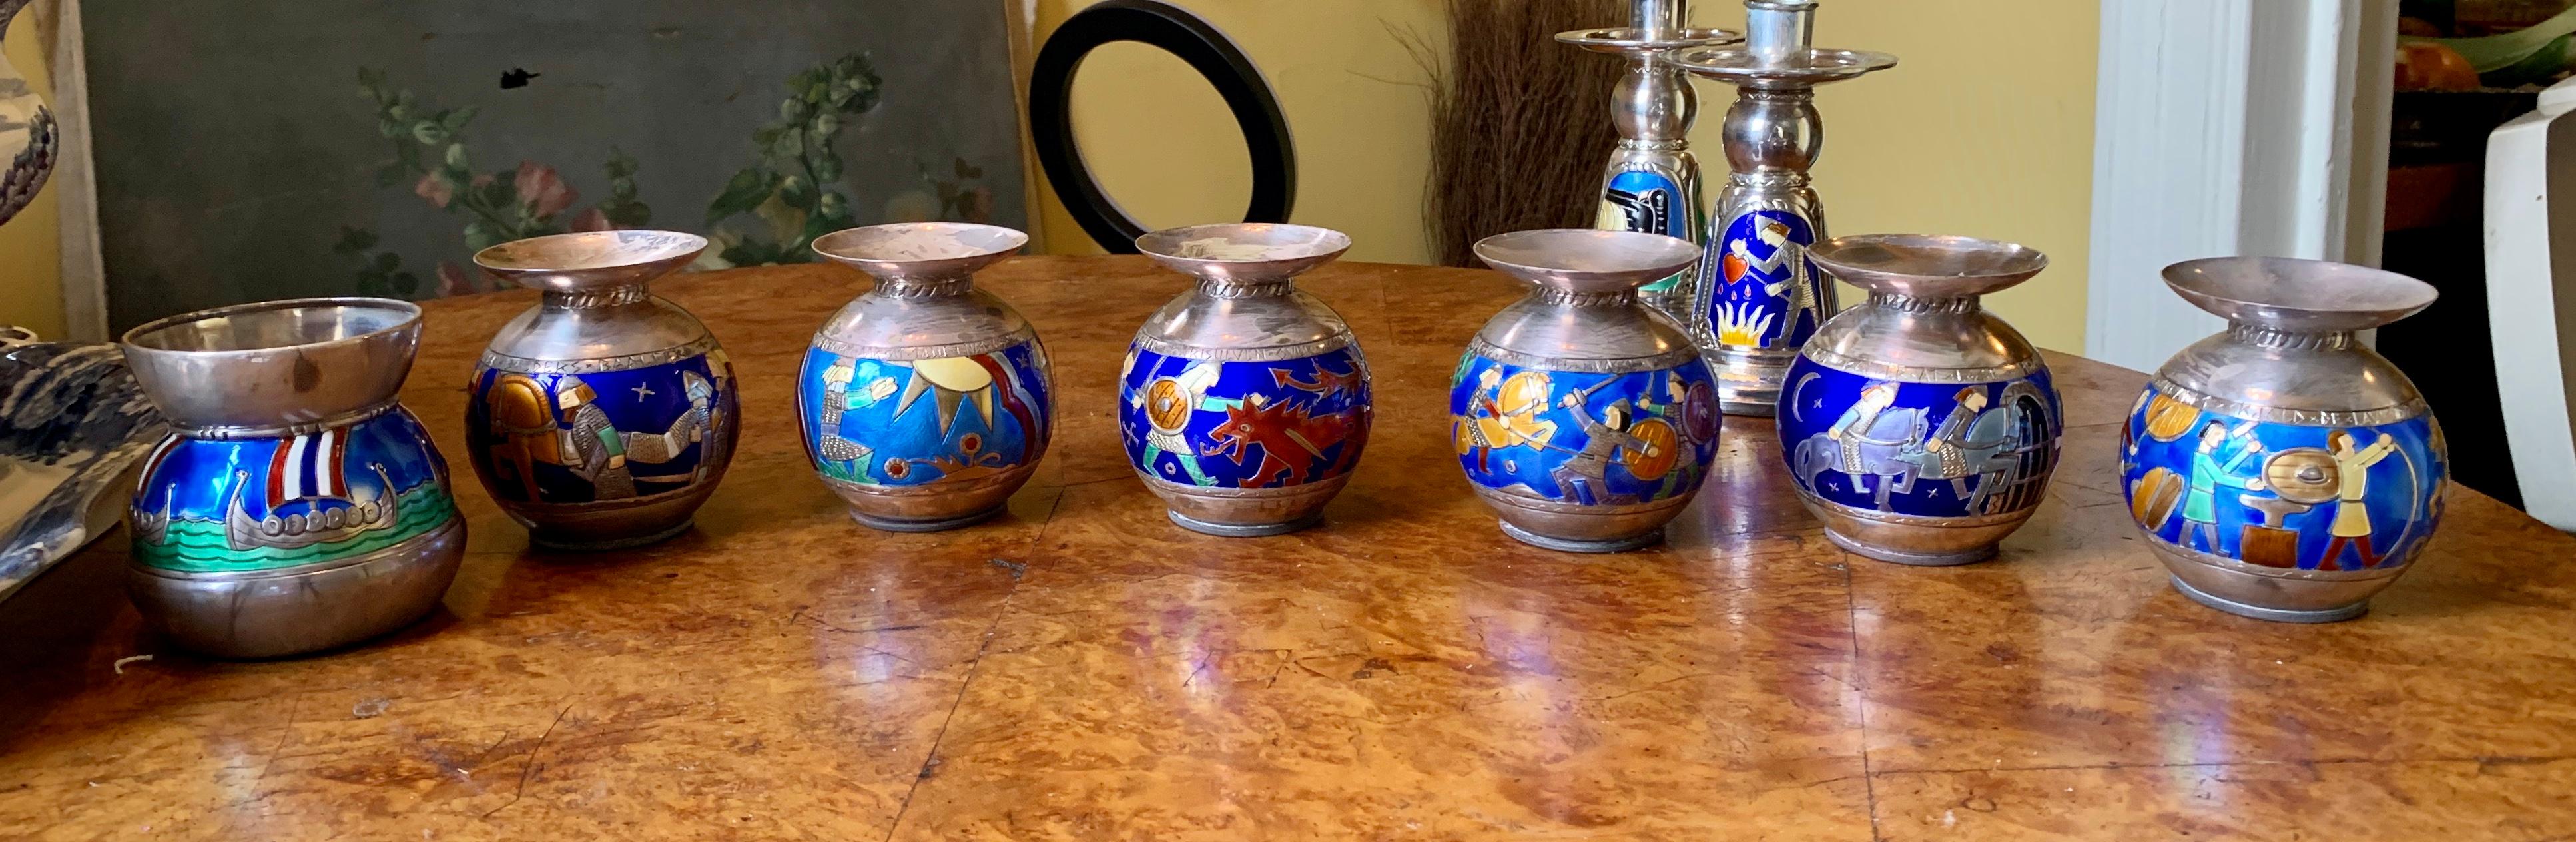 This is an extraordinary rare museum quality set of six Mid-Century Modern Enamel Candlesticks made by the Norwegian maker N.M. Thune of Norway.   Along with the six candlesticks is a matching vase.  Each is adorned with magnificent enamel images